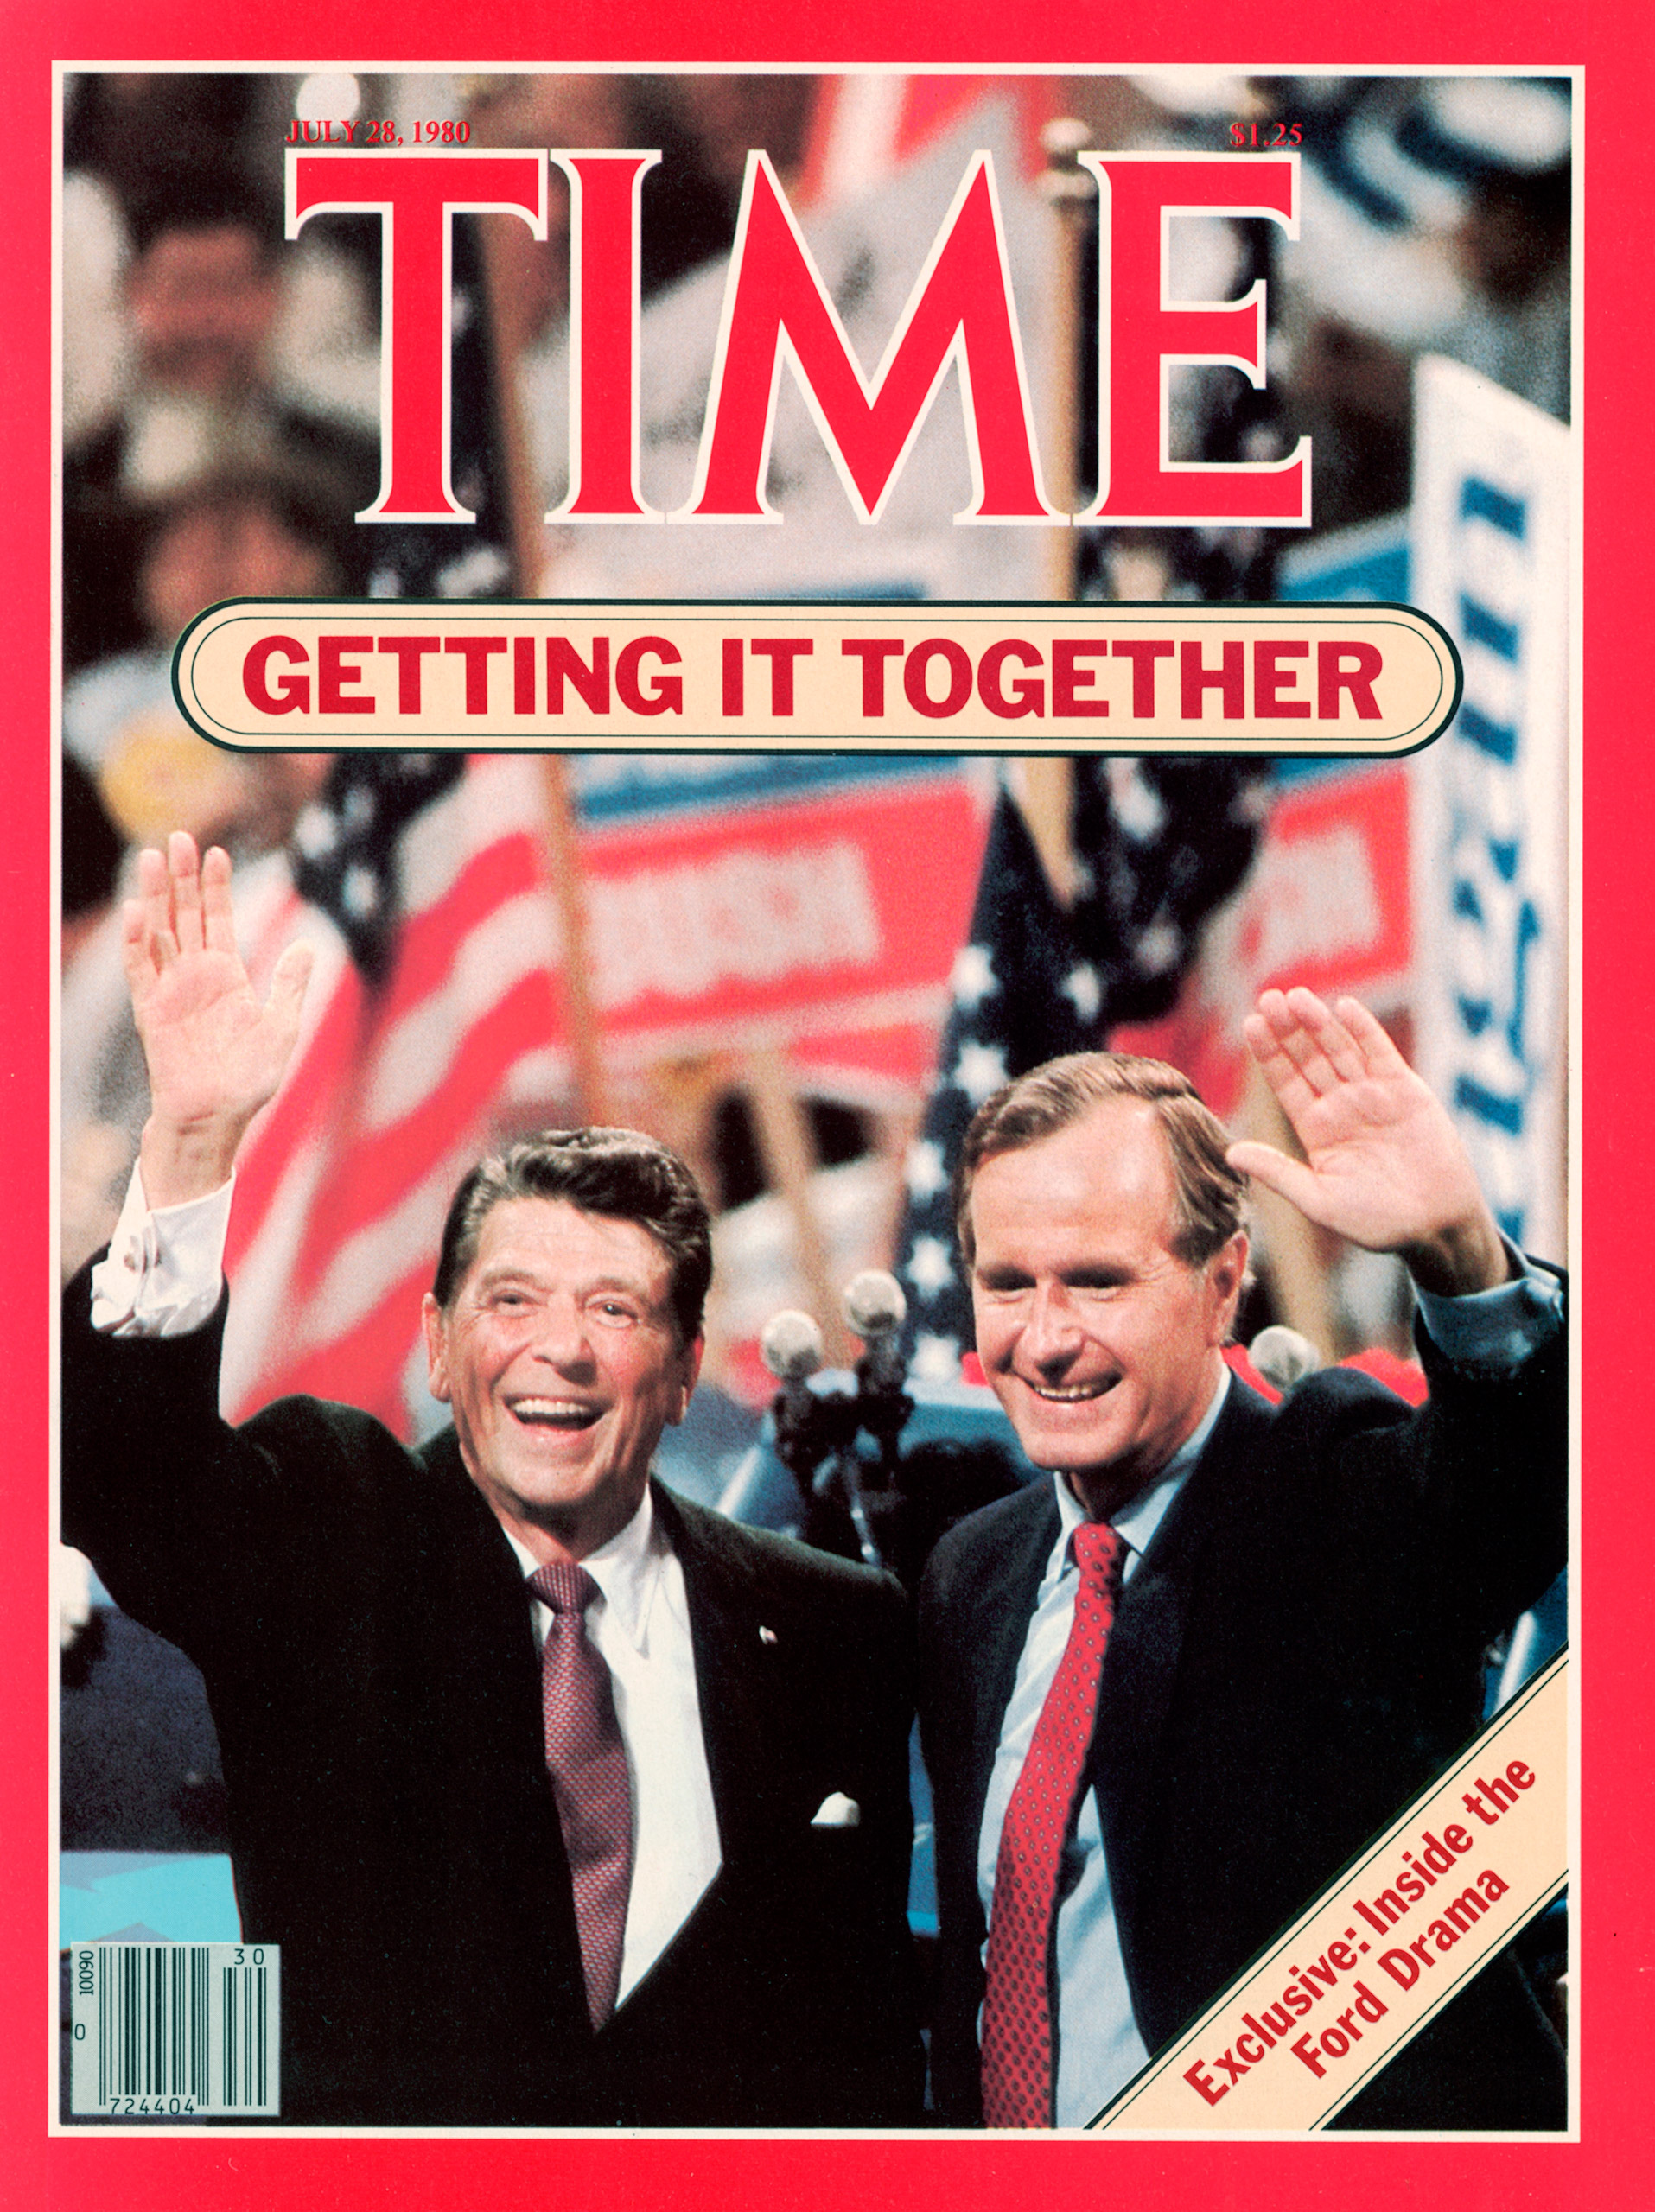 Ronald Reagan &amp; George H.W. Bush on the Jul. 28, 1980, cover of TIME. Cover photo by Neil Leifer.